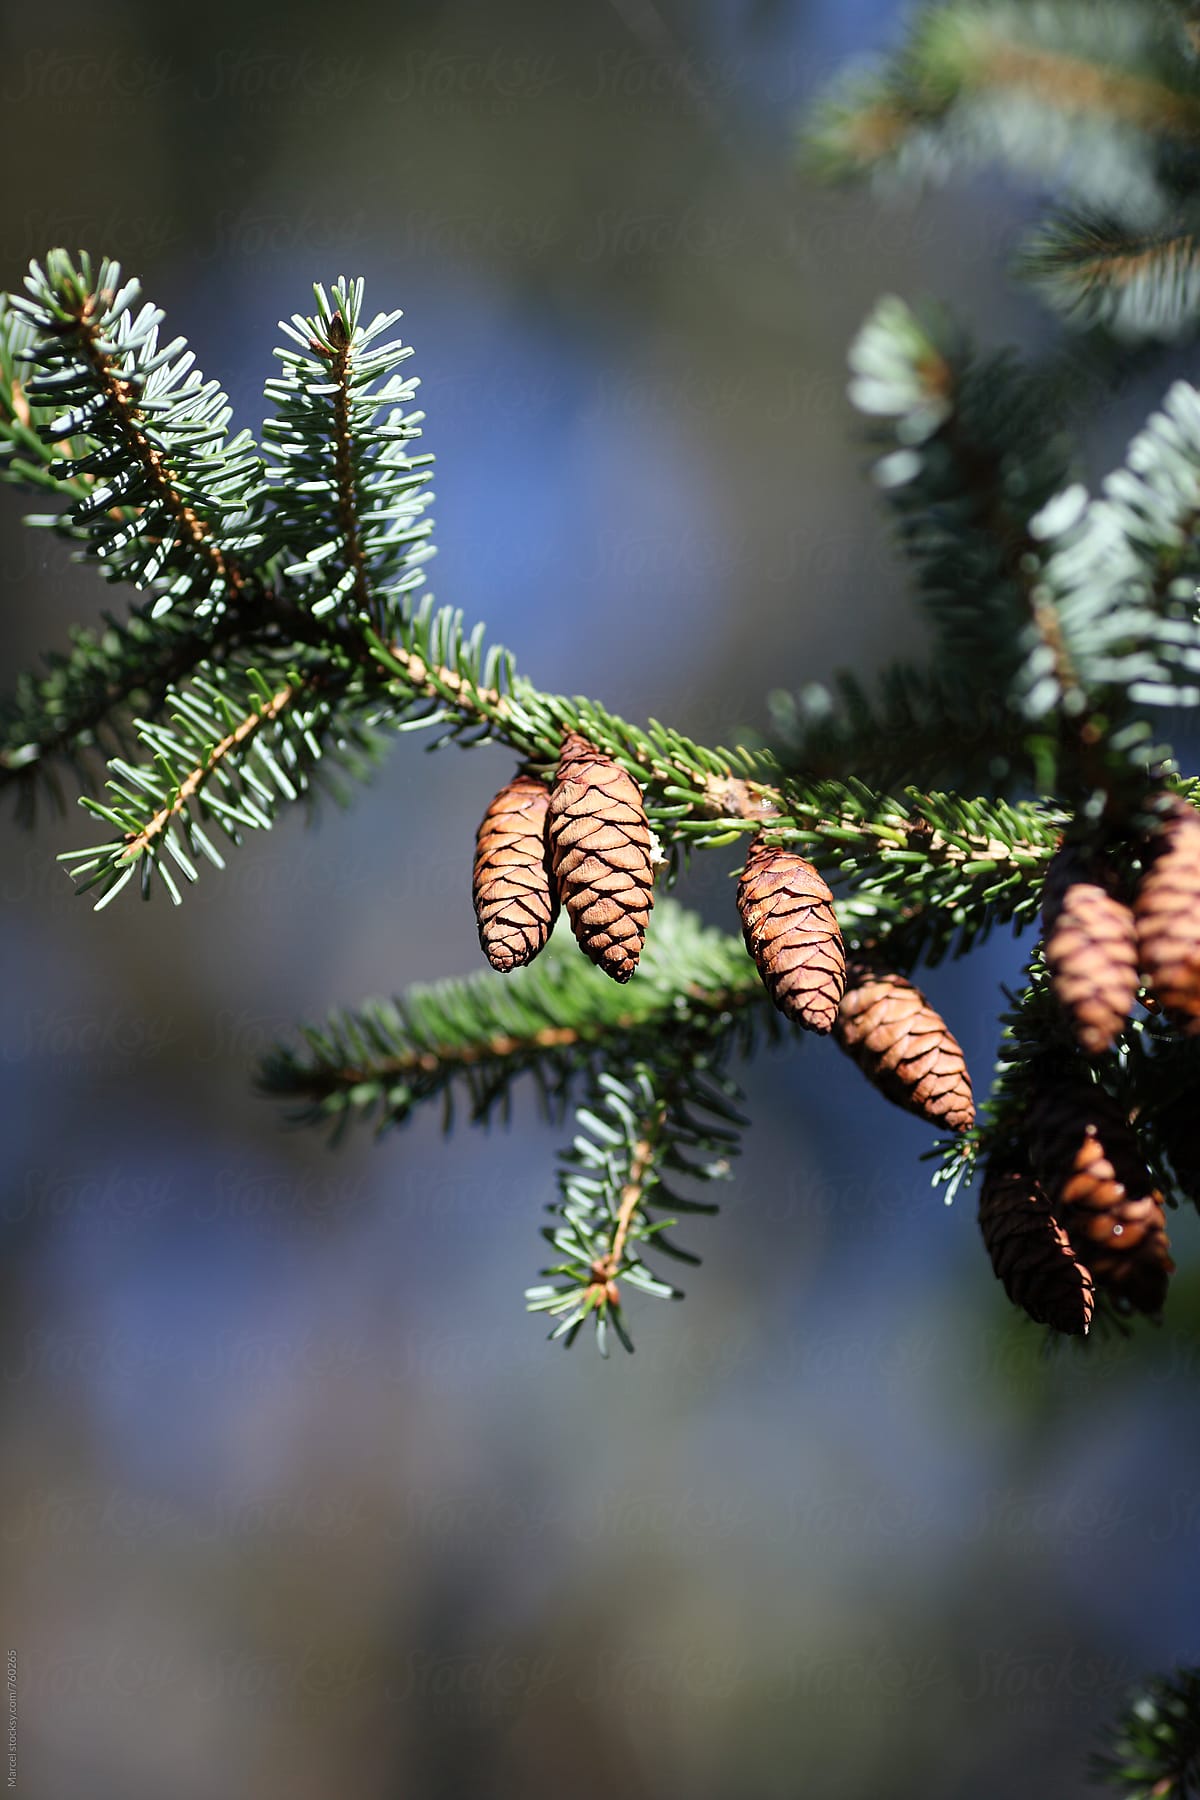 Cones on a pine tree branch